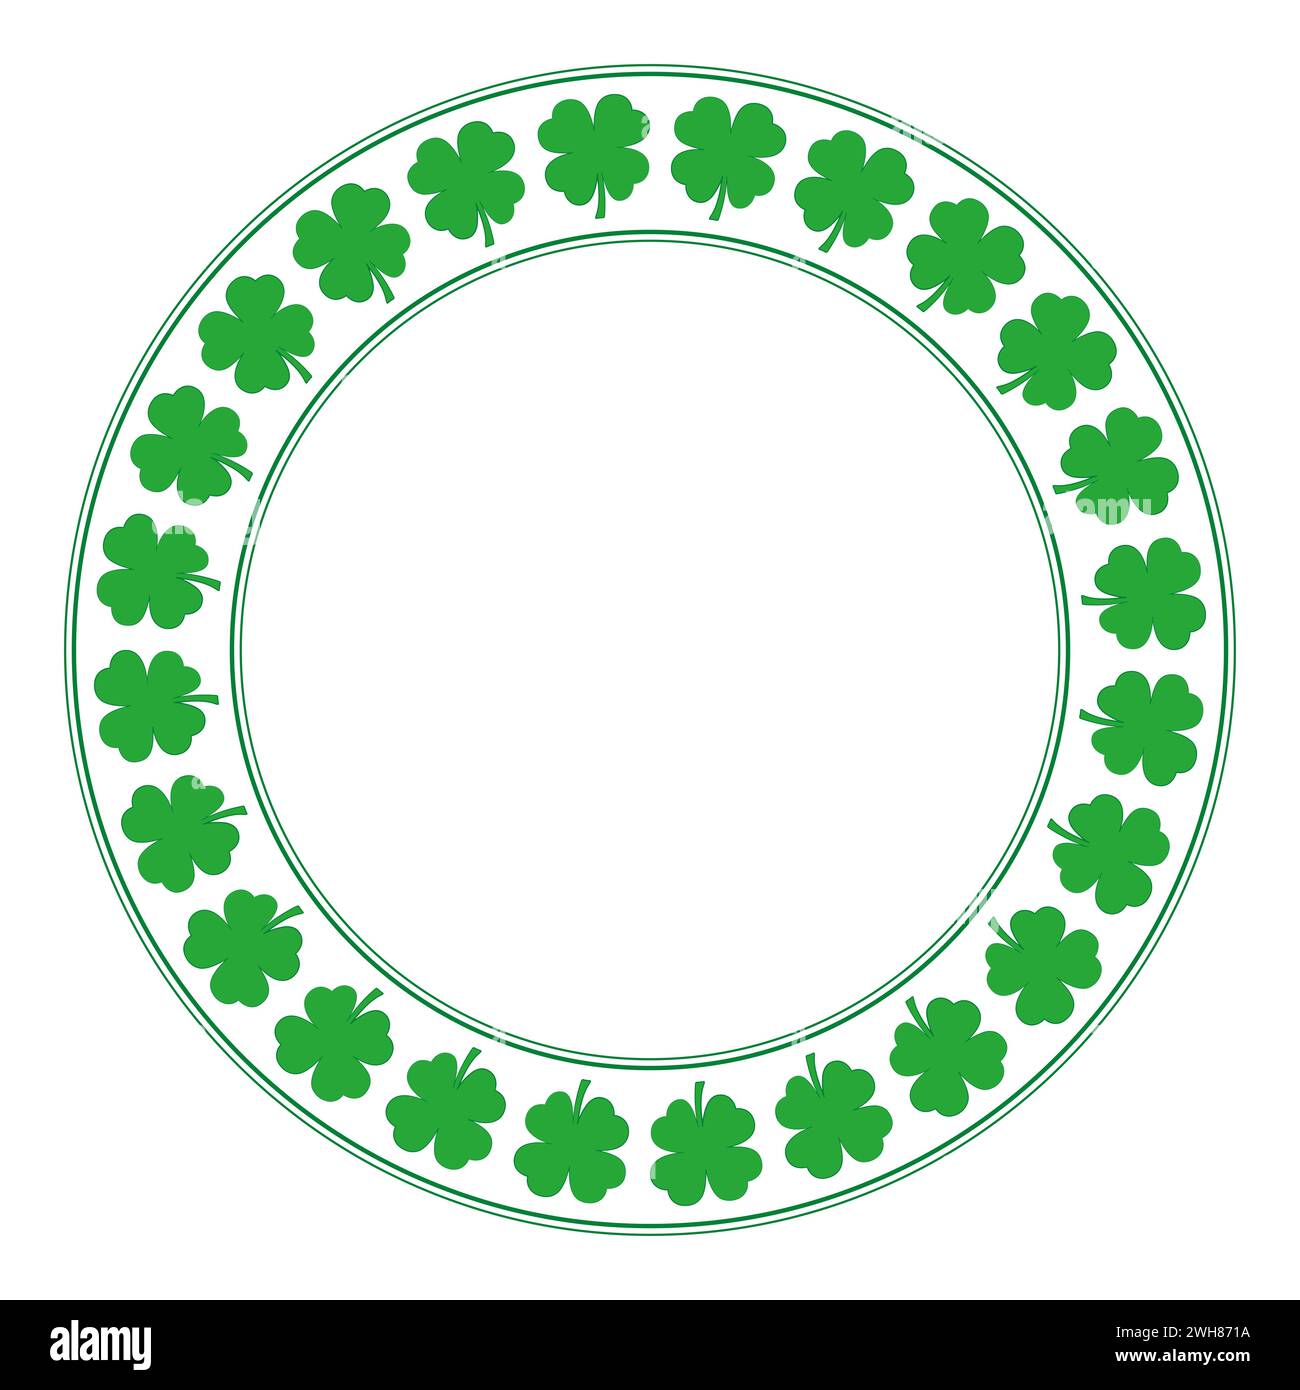 Green circle frame with clover pattern. Decorative border with circular arranged four-leaf clovers. They are considered lucky. Stock Photo